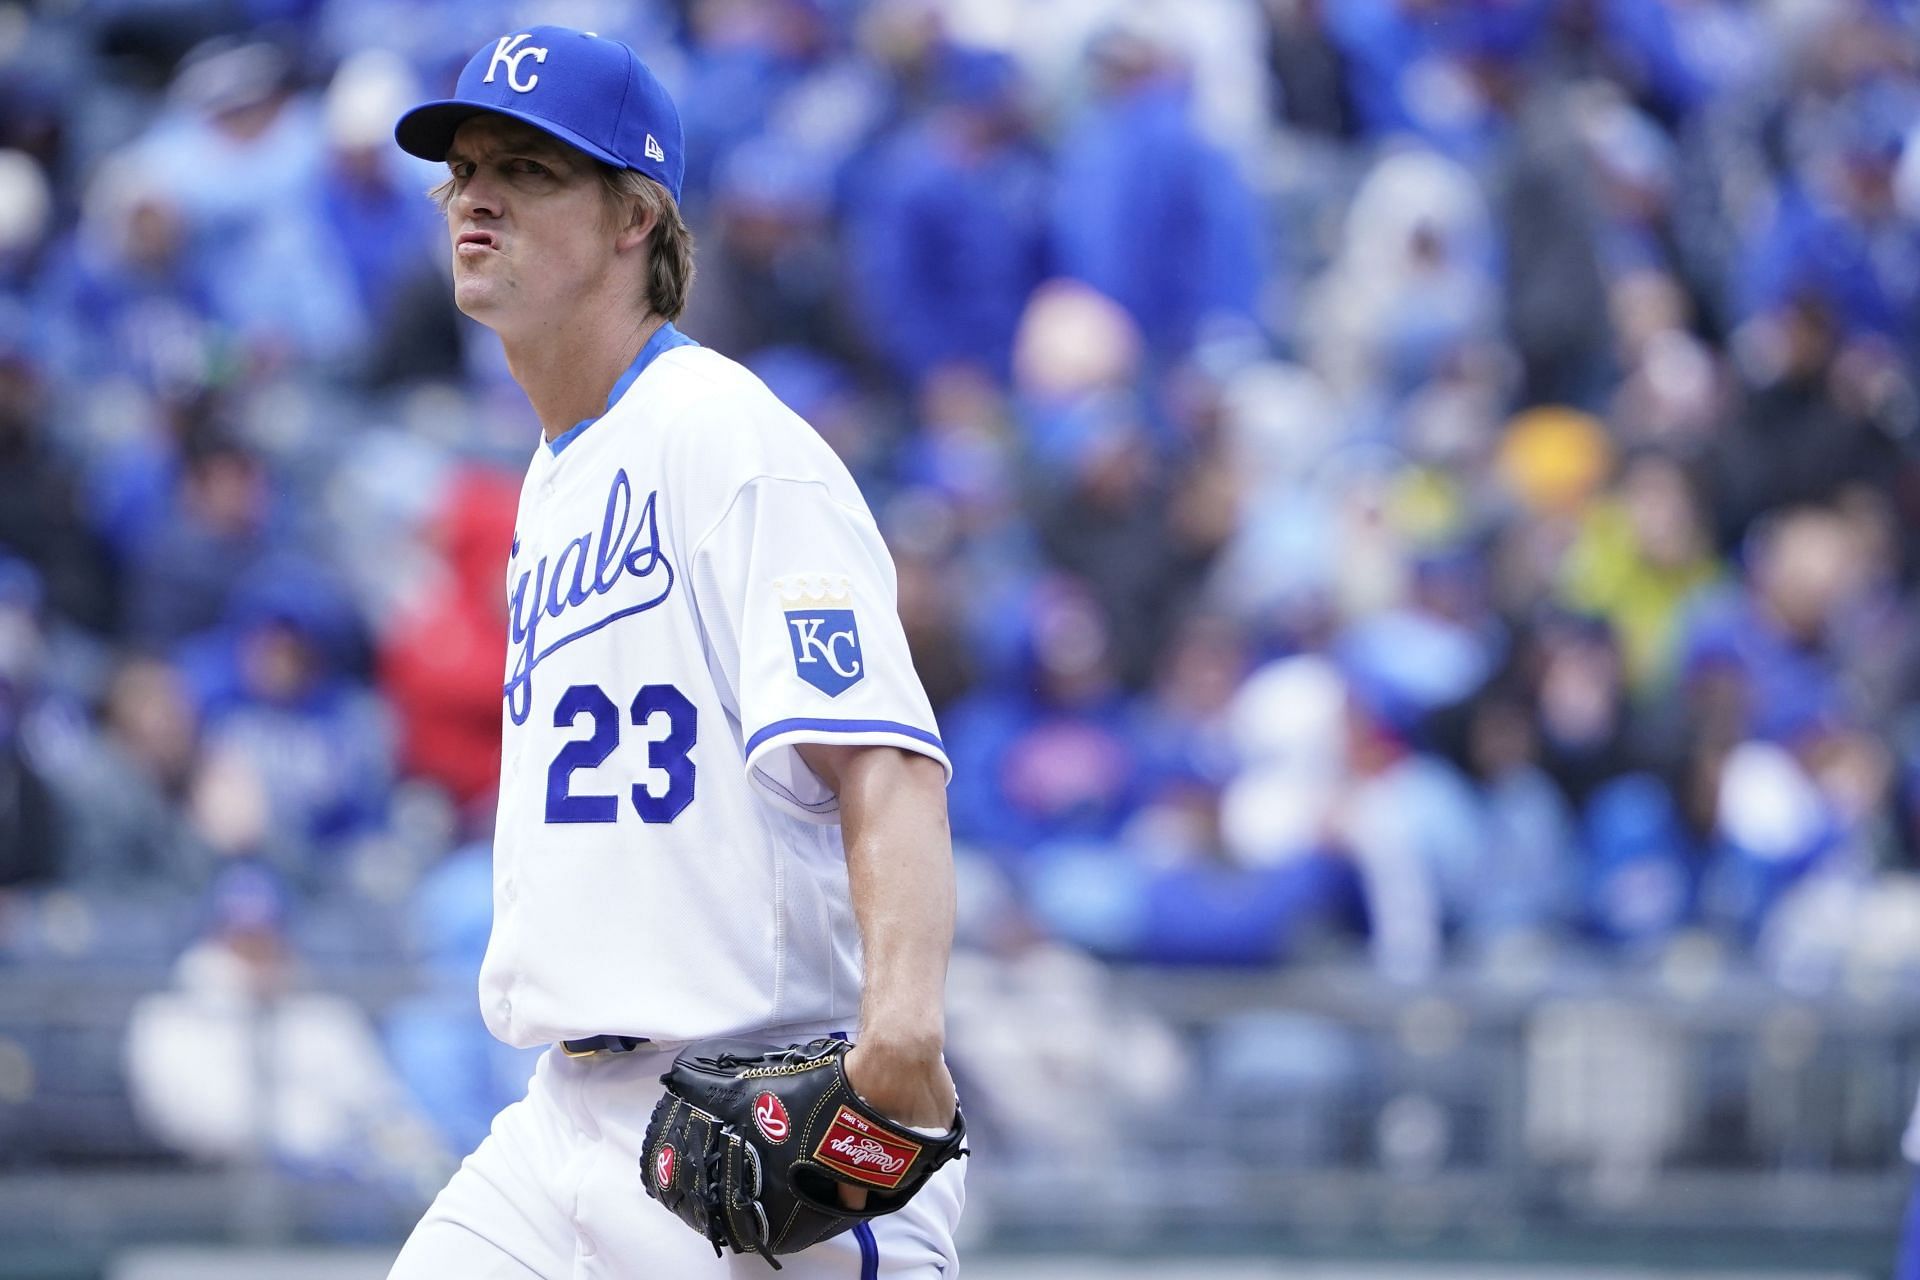 Zack Greinke Story Goes Viral: MLB World Reacts - The Spun: What's